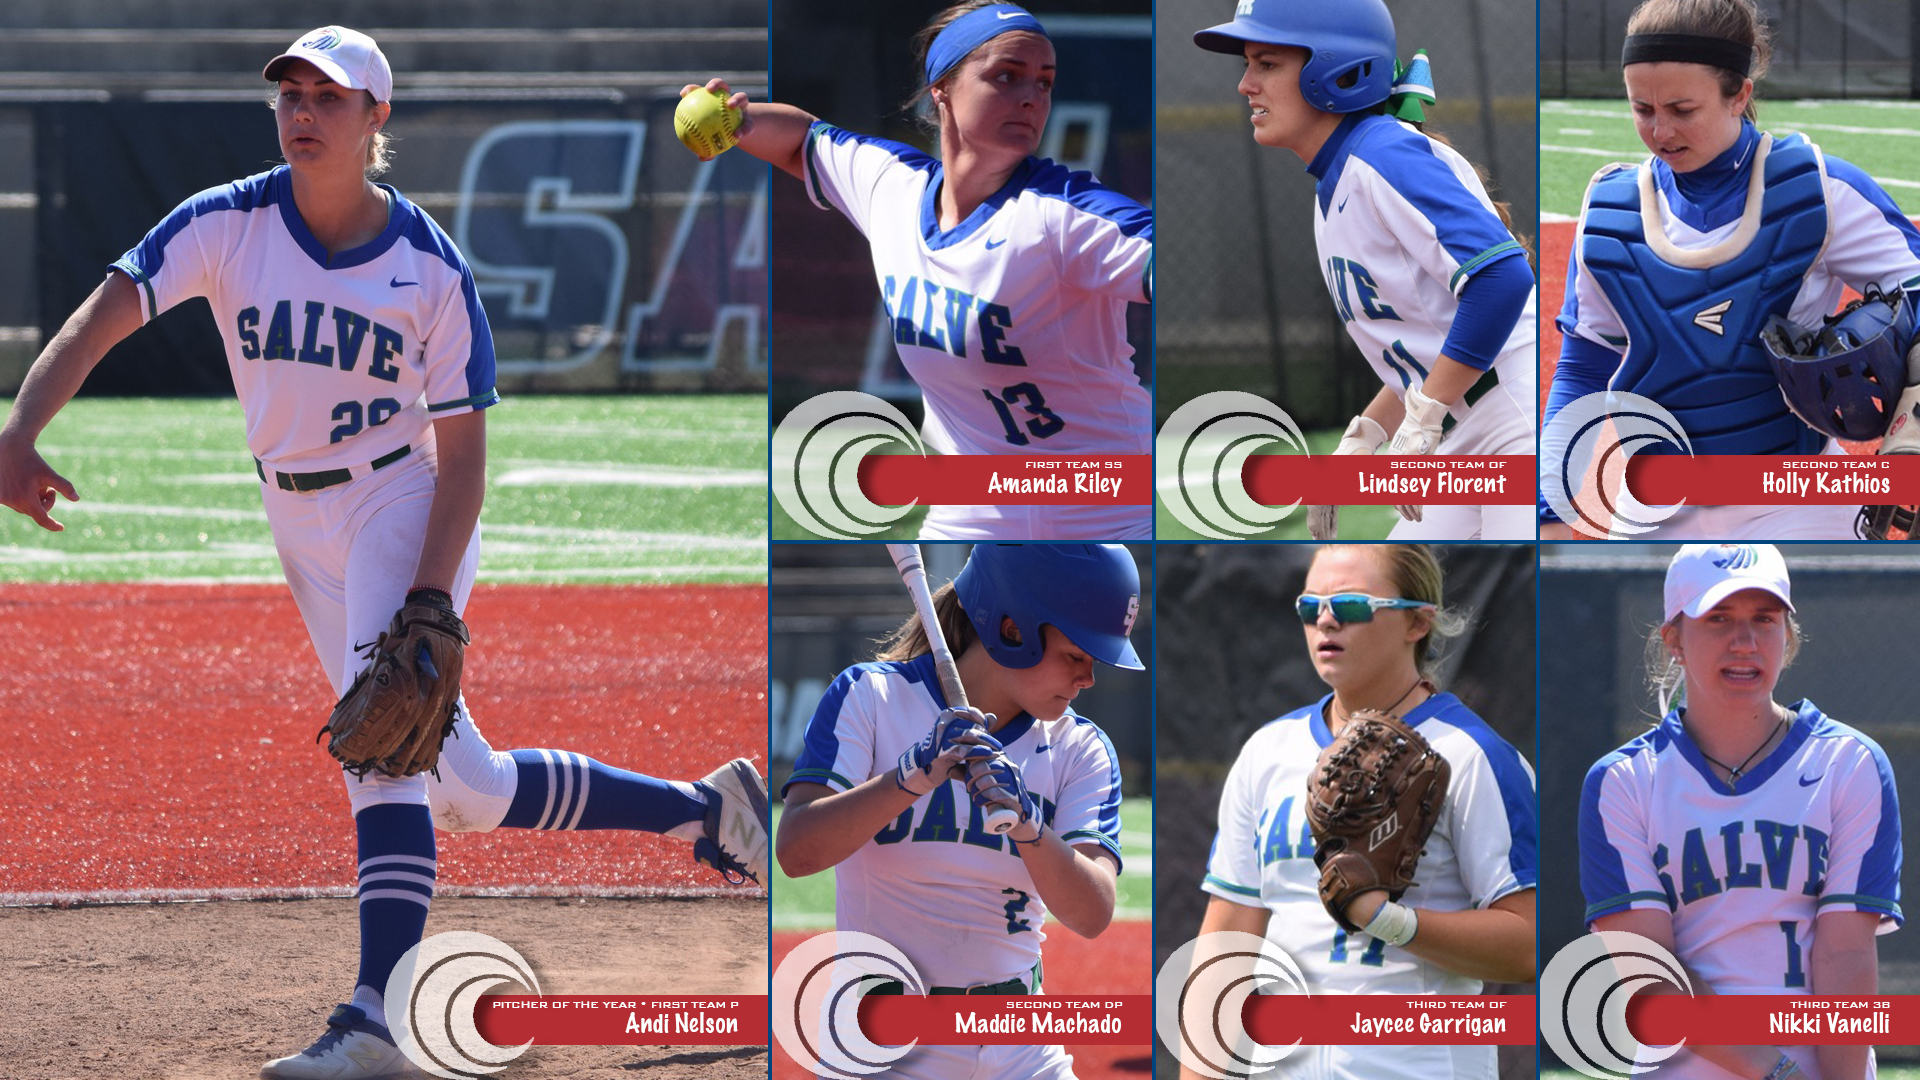 Seven Seahawks earn All-CCC honors highlighted by Pitcher of the Year Andi Nelson.